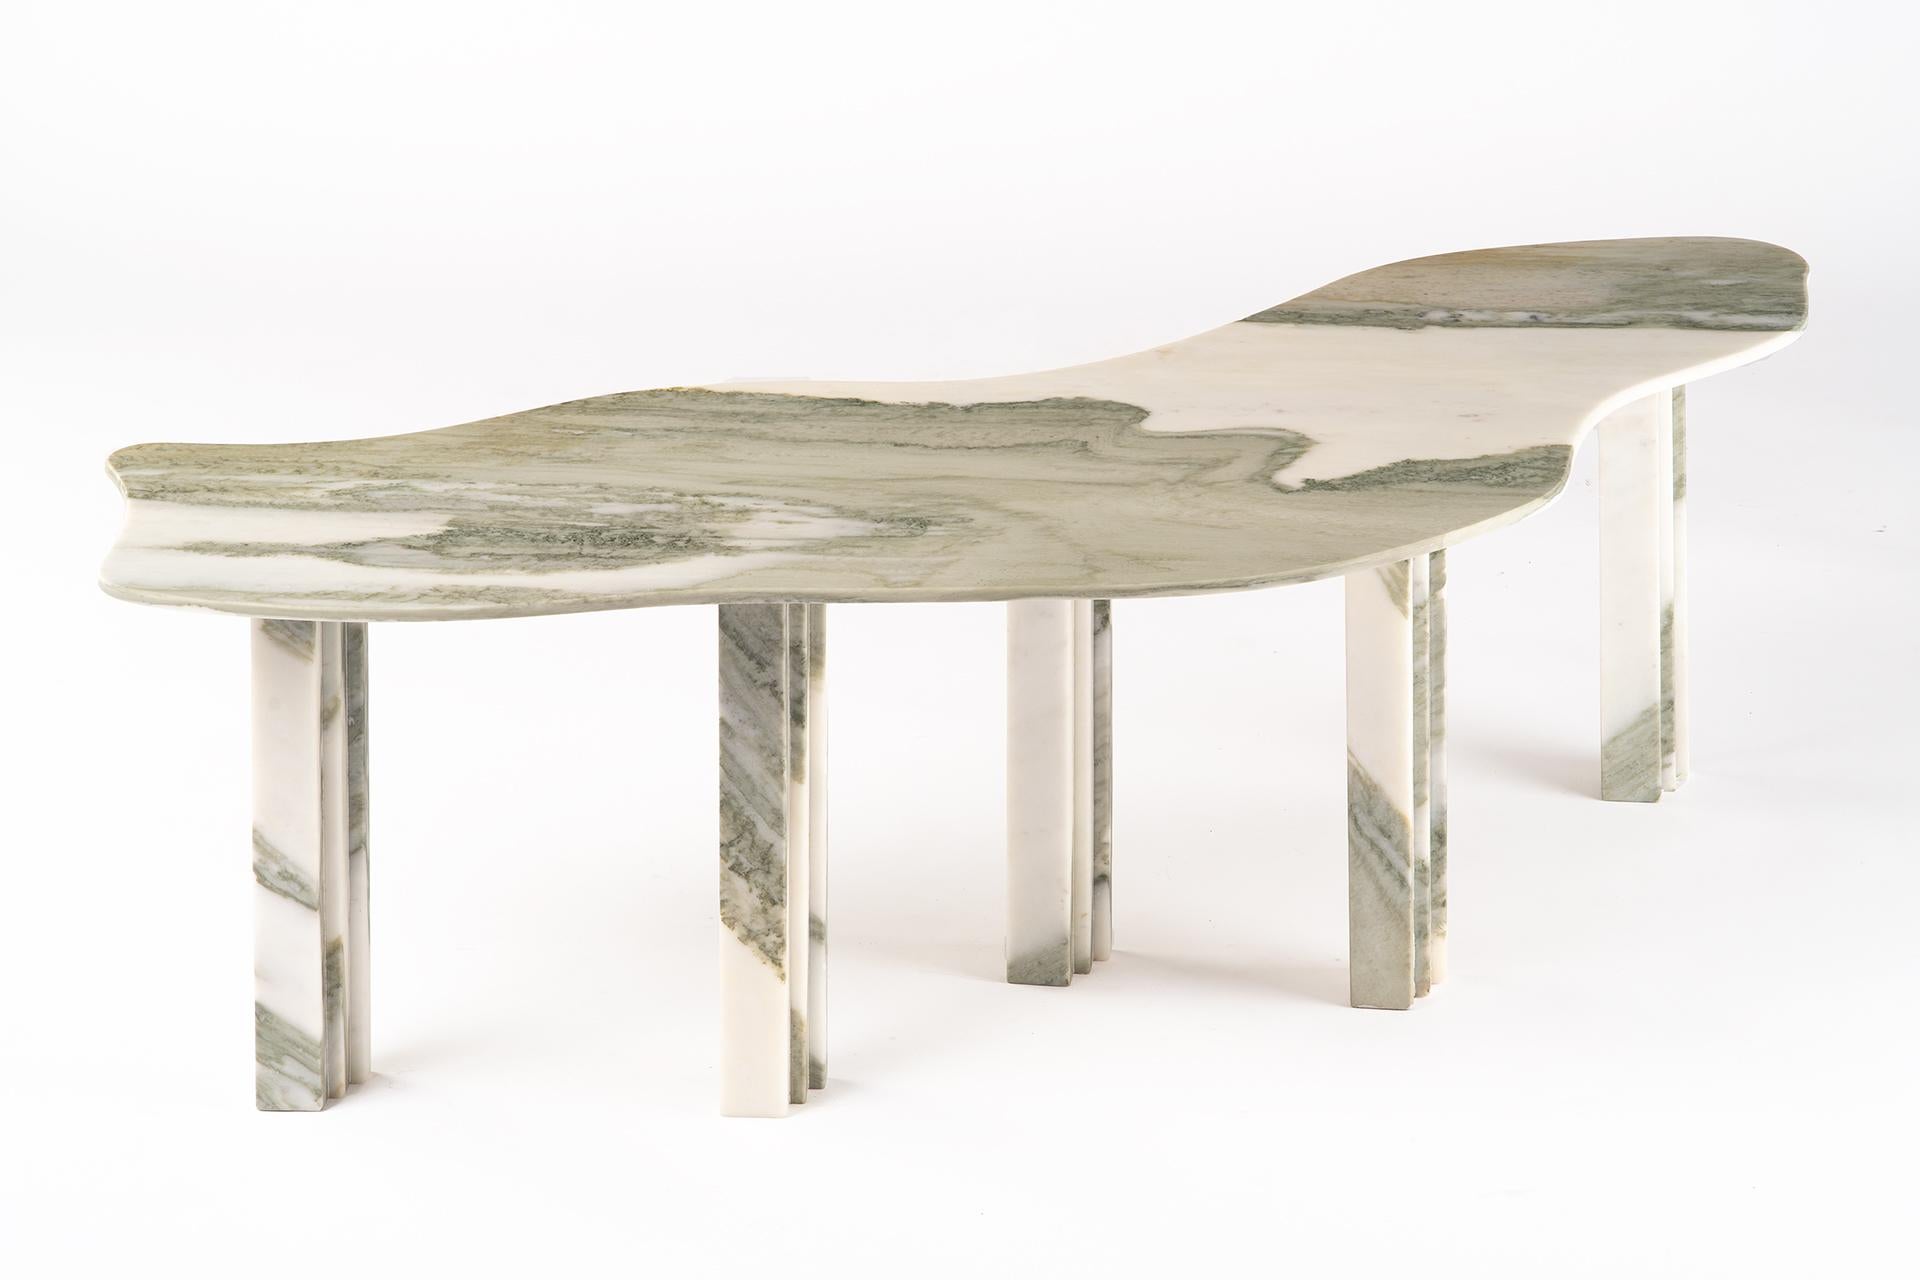 Bicolor sculptural dining marble table signed by Lorenzo Bini
Measures: 250 x 100 x H 73.5 cm
Materials: Calacatta

Also available as a  Coffee table 125 x 50 x H 37 cm
Please contact us.

SIX TABLEAUX is a series of marble tables designed by